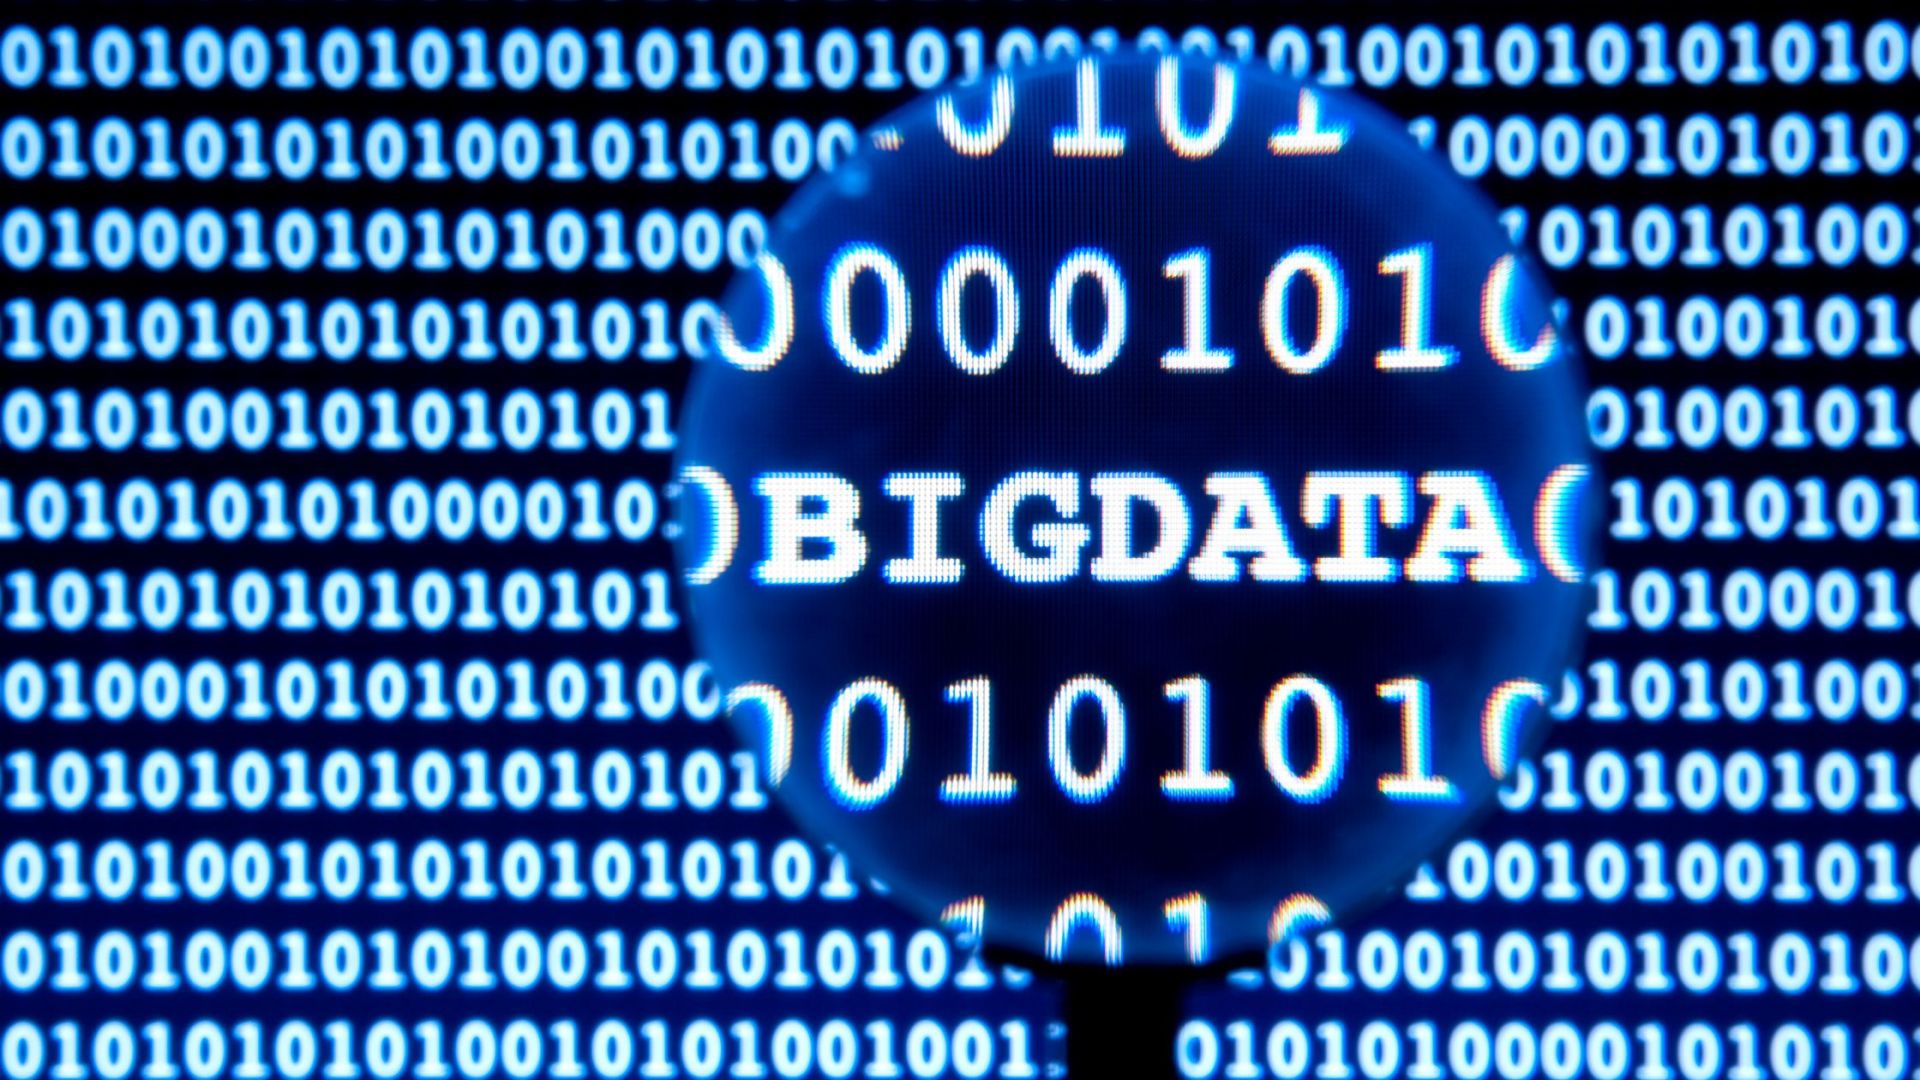 Top Trends for Big Data in 2022